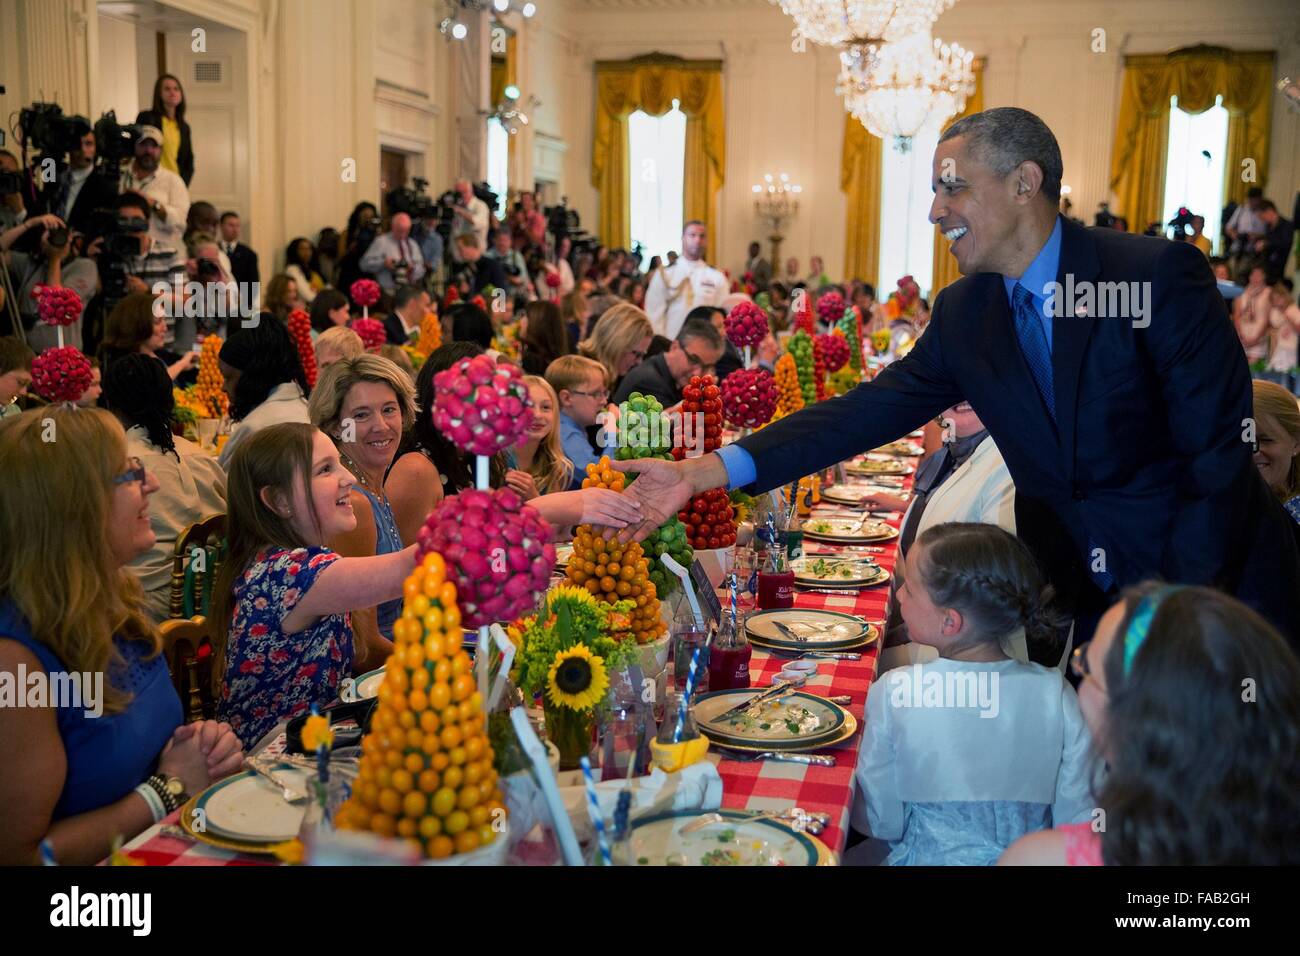 U.S. President Barack Obama greets winners during the Kids State Dinner in the East Room at the White House July 10, 2015 in Washington, DC. The dinner awards the winners of the Healthy Lunchtime Challenge, a nationwide recipe challenge for kids that promotes cooking and healthy eating. Stock Photo